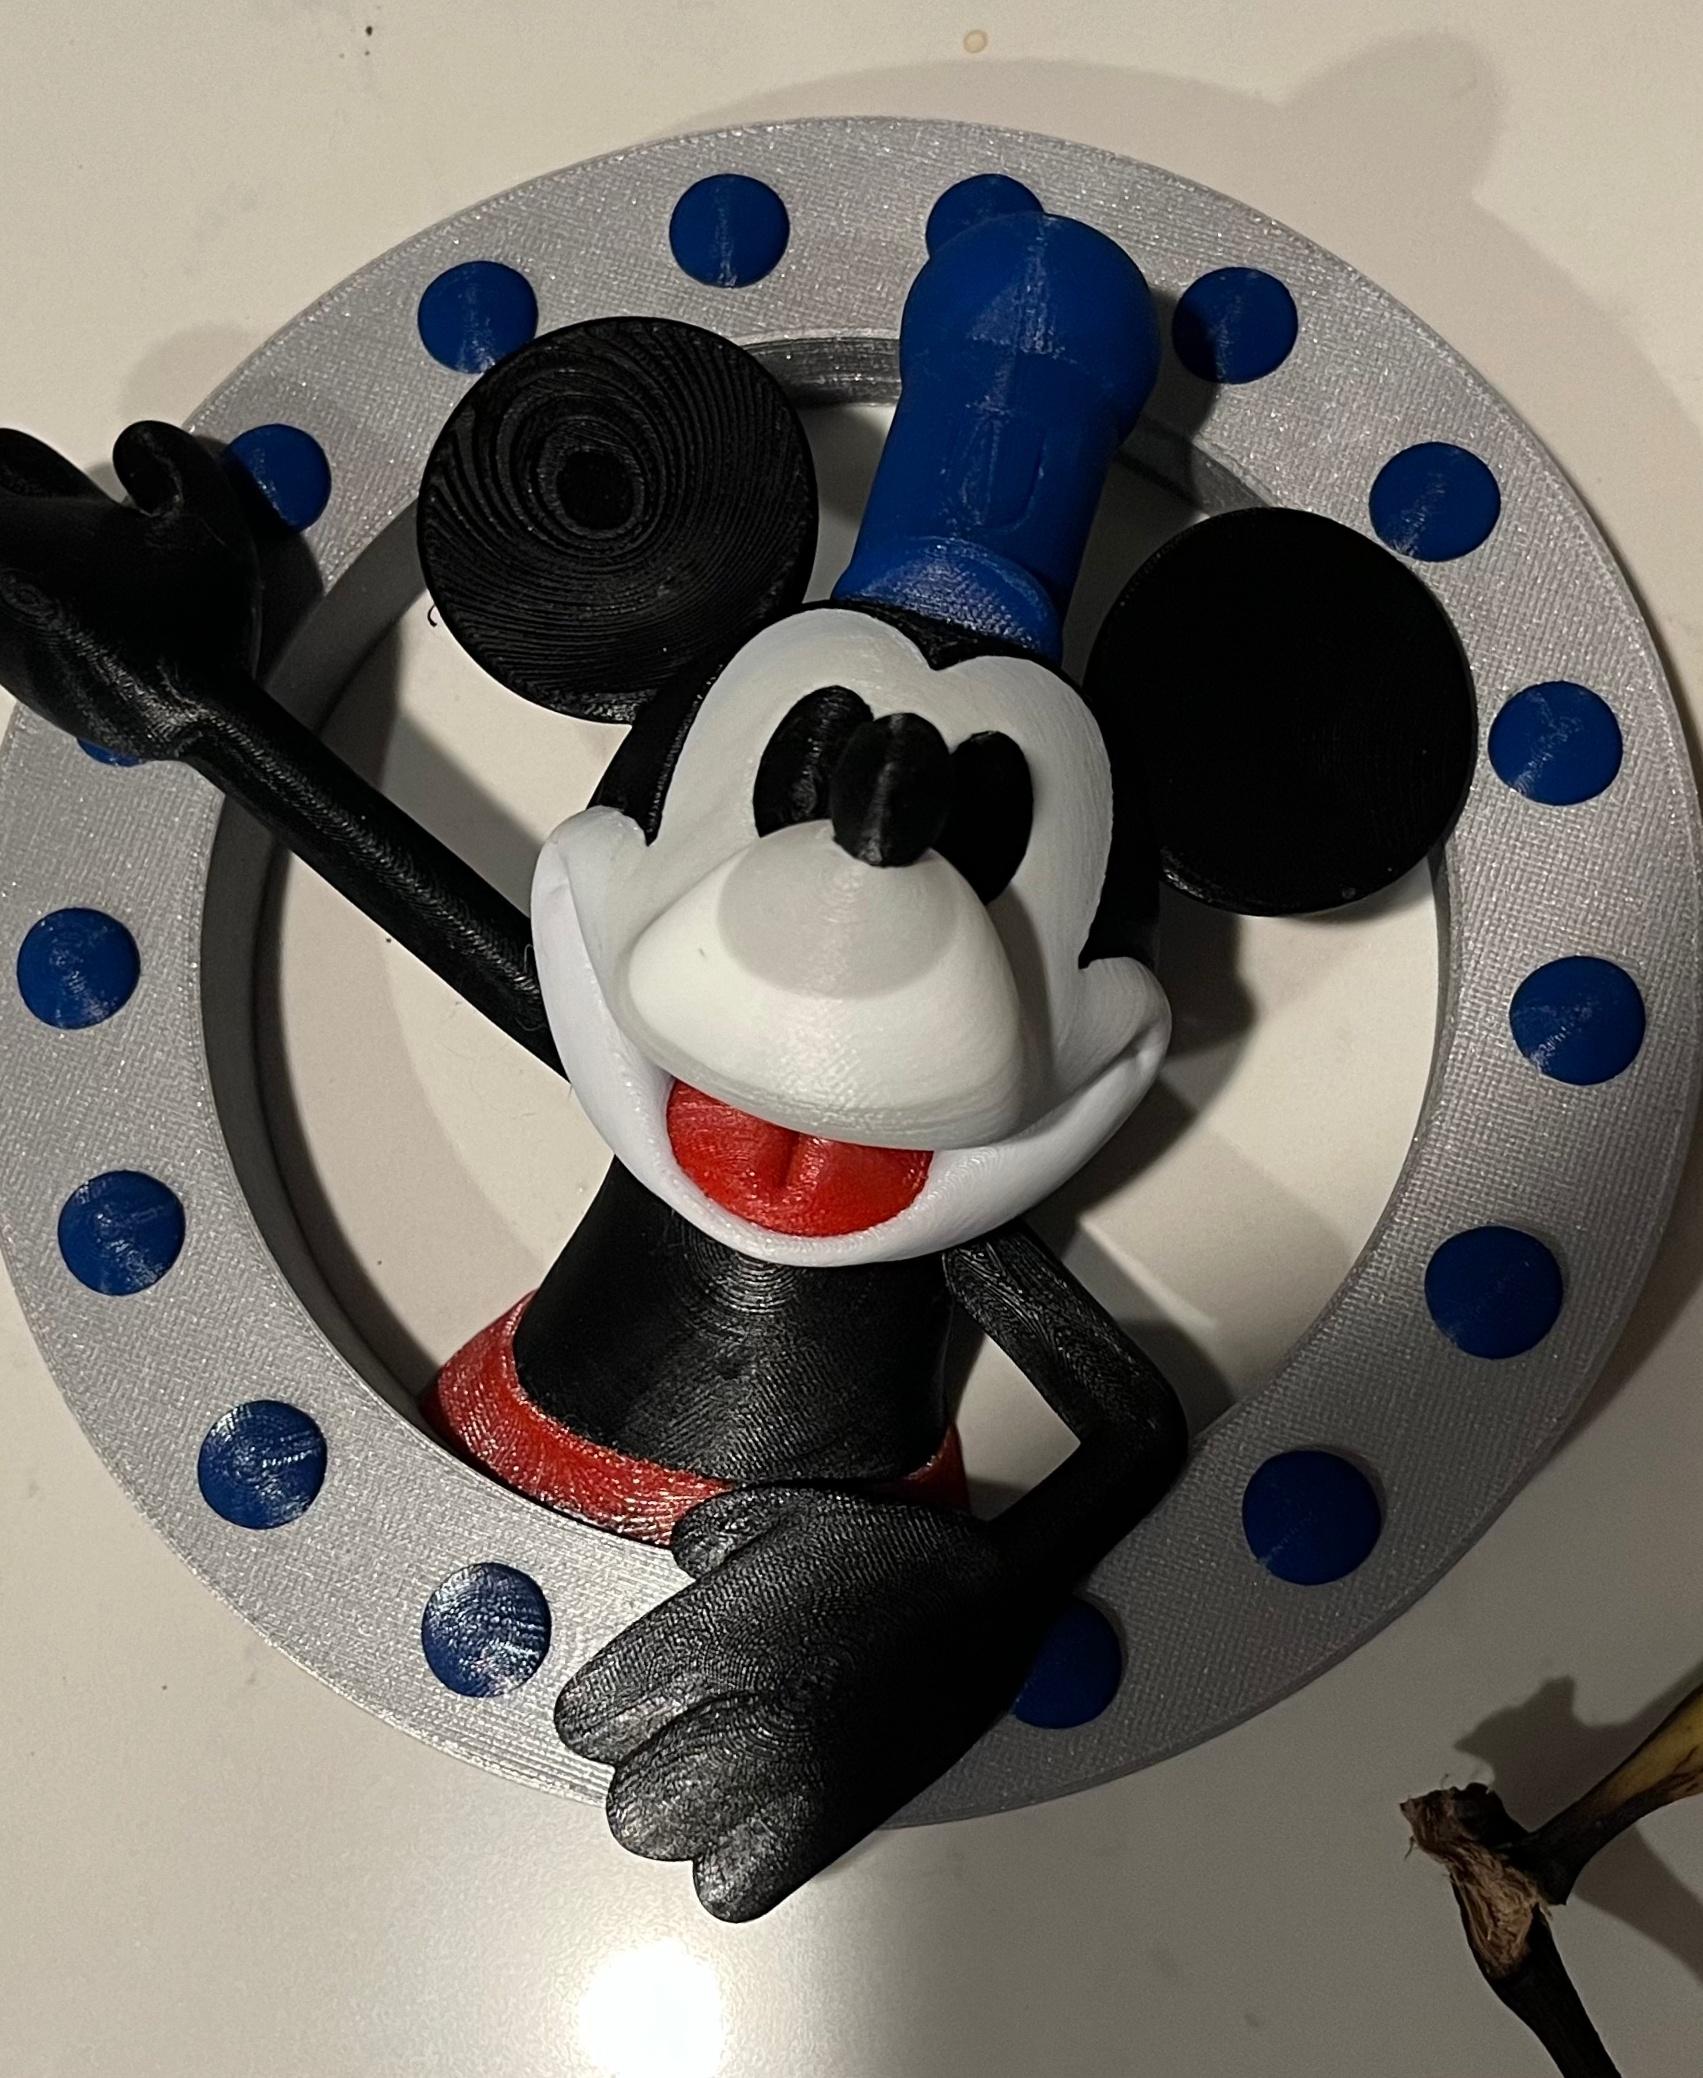 Steamboat Willie Porthole  - Painted in PrusaSlicer, Printed on Prusa i3 MK3S+ with MMU3.

Next time: need to fix color bleeding with the white filament on the nose/mouth. - 3d model